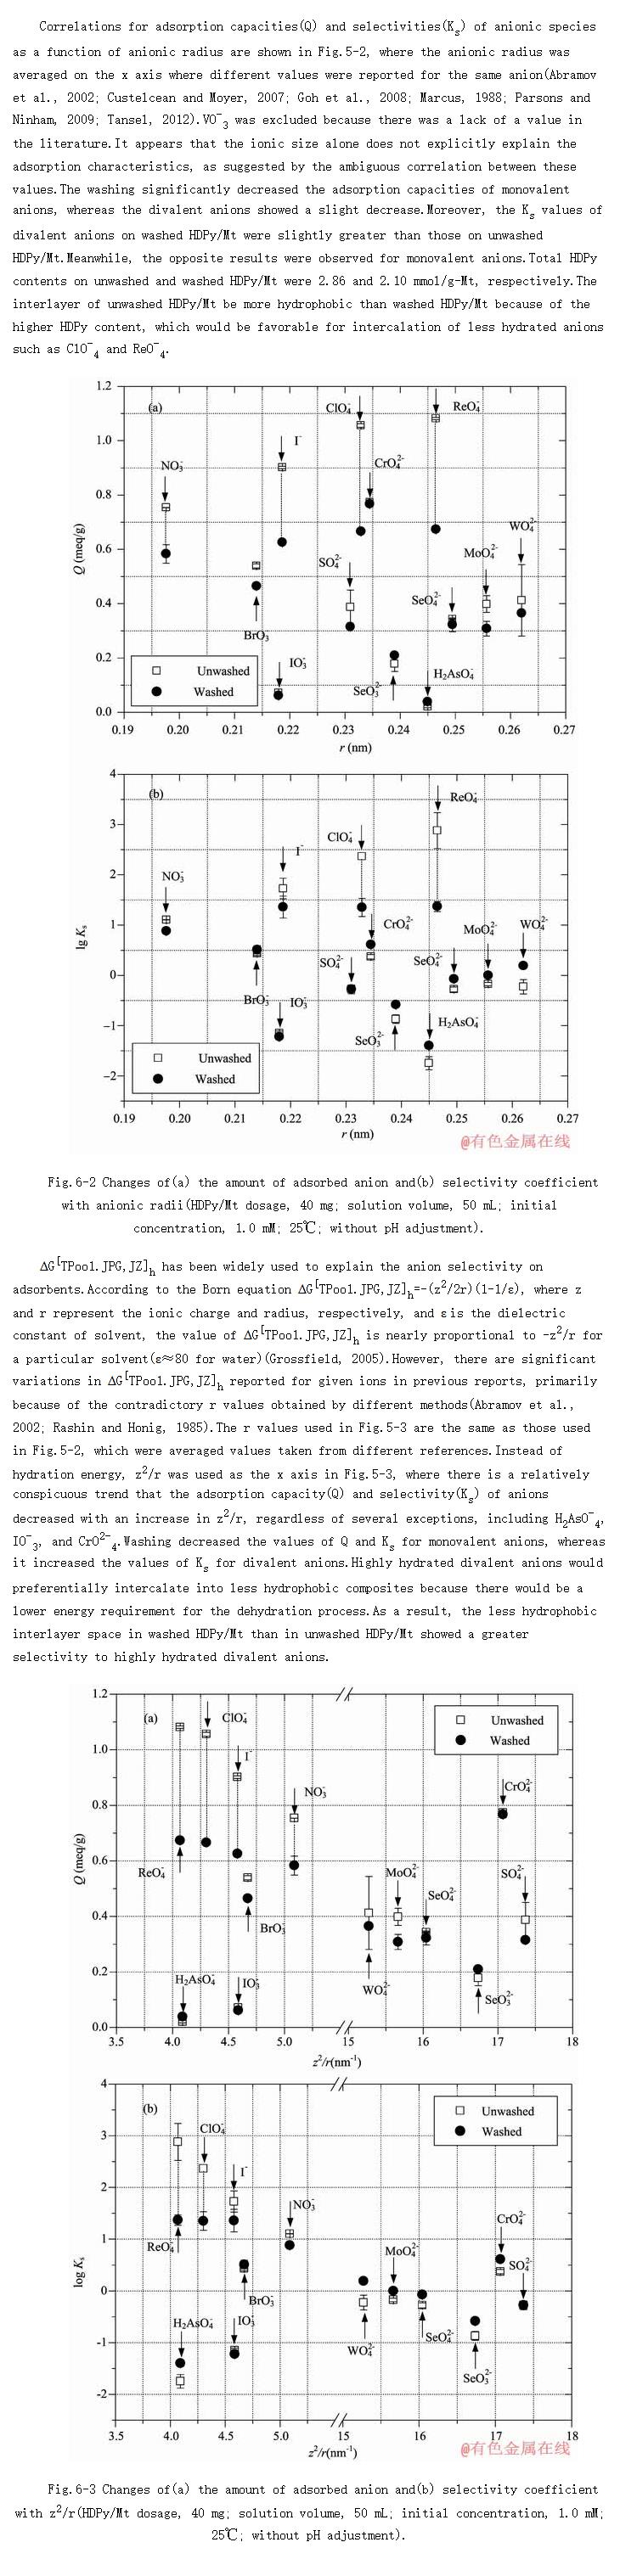 Relationships of adsorption capacity and selectivity with anionic radius and hydration energy